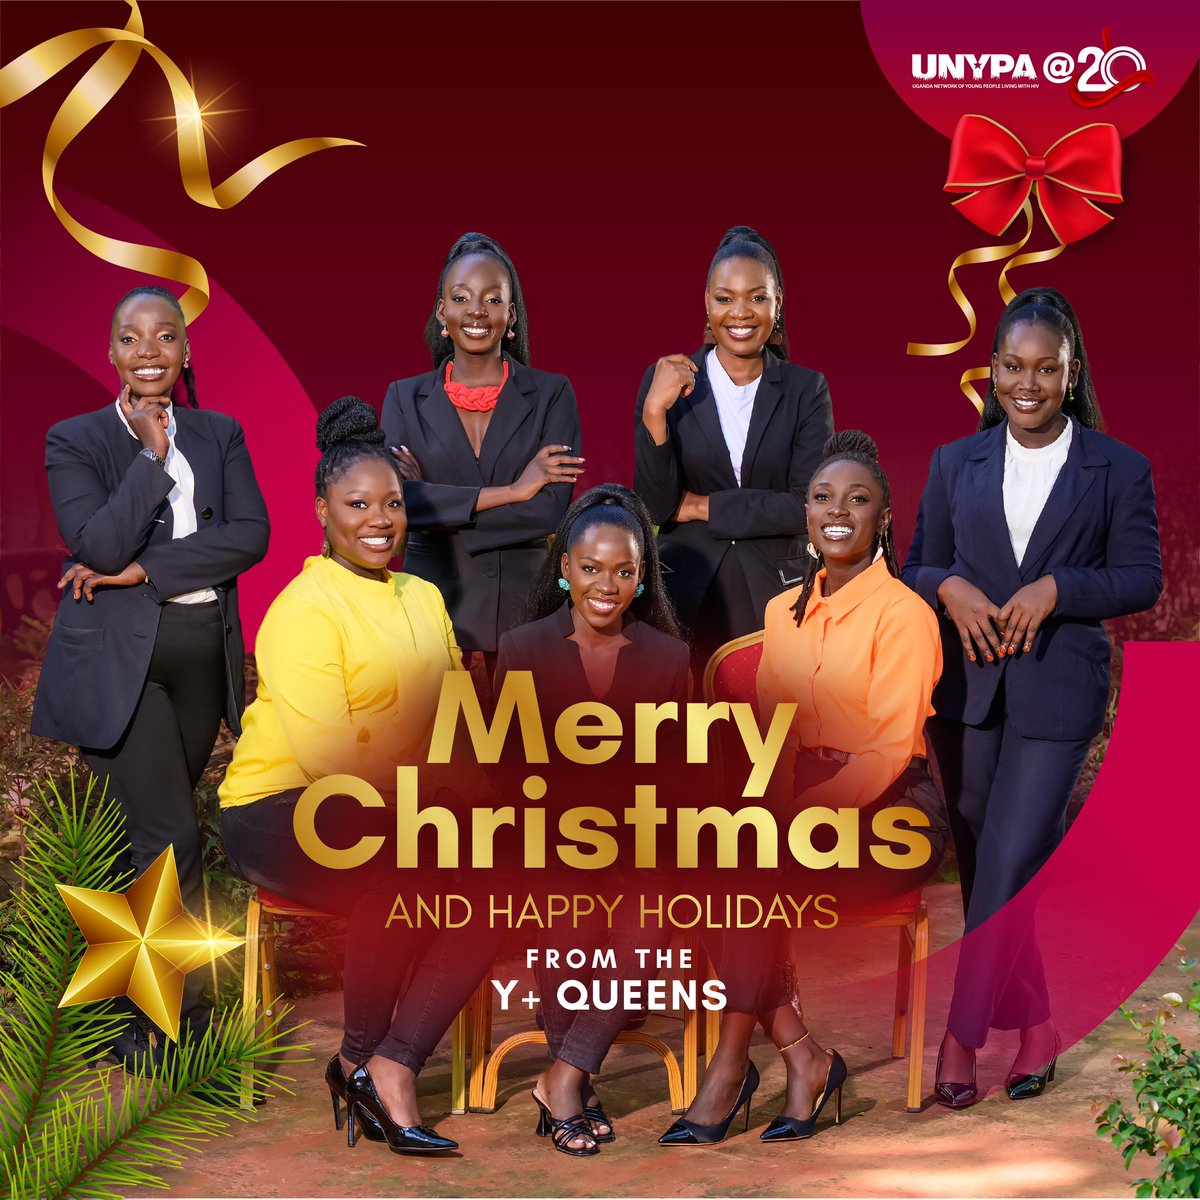 Time flies, and we are already reaching the Christmas 🎄 . We want to express our gratitude for your hard work. We hope you are all having a wonderful holiday season with your family and friends. To all of you, Merry Christmas from the Y+ Queens. #UnypaAt20